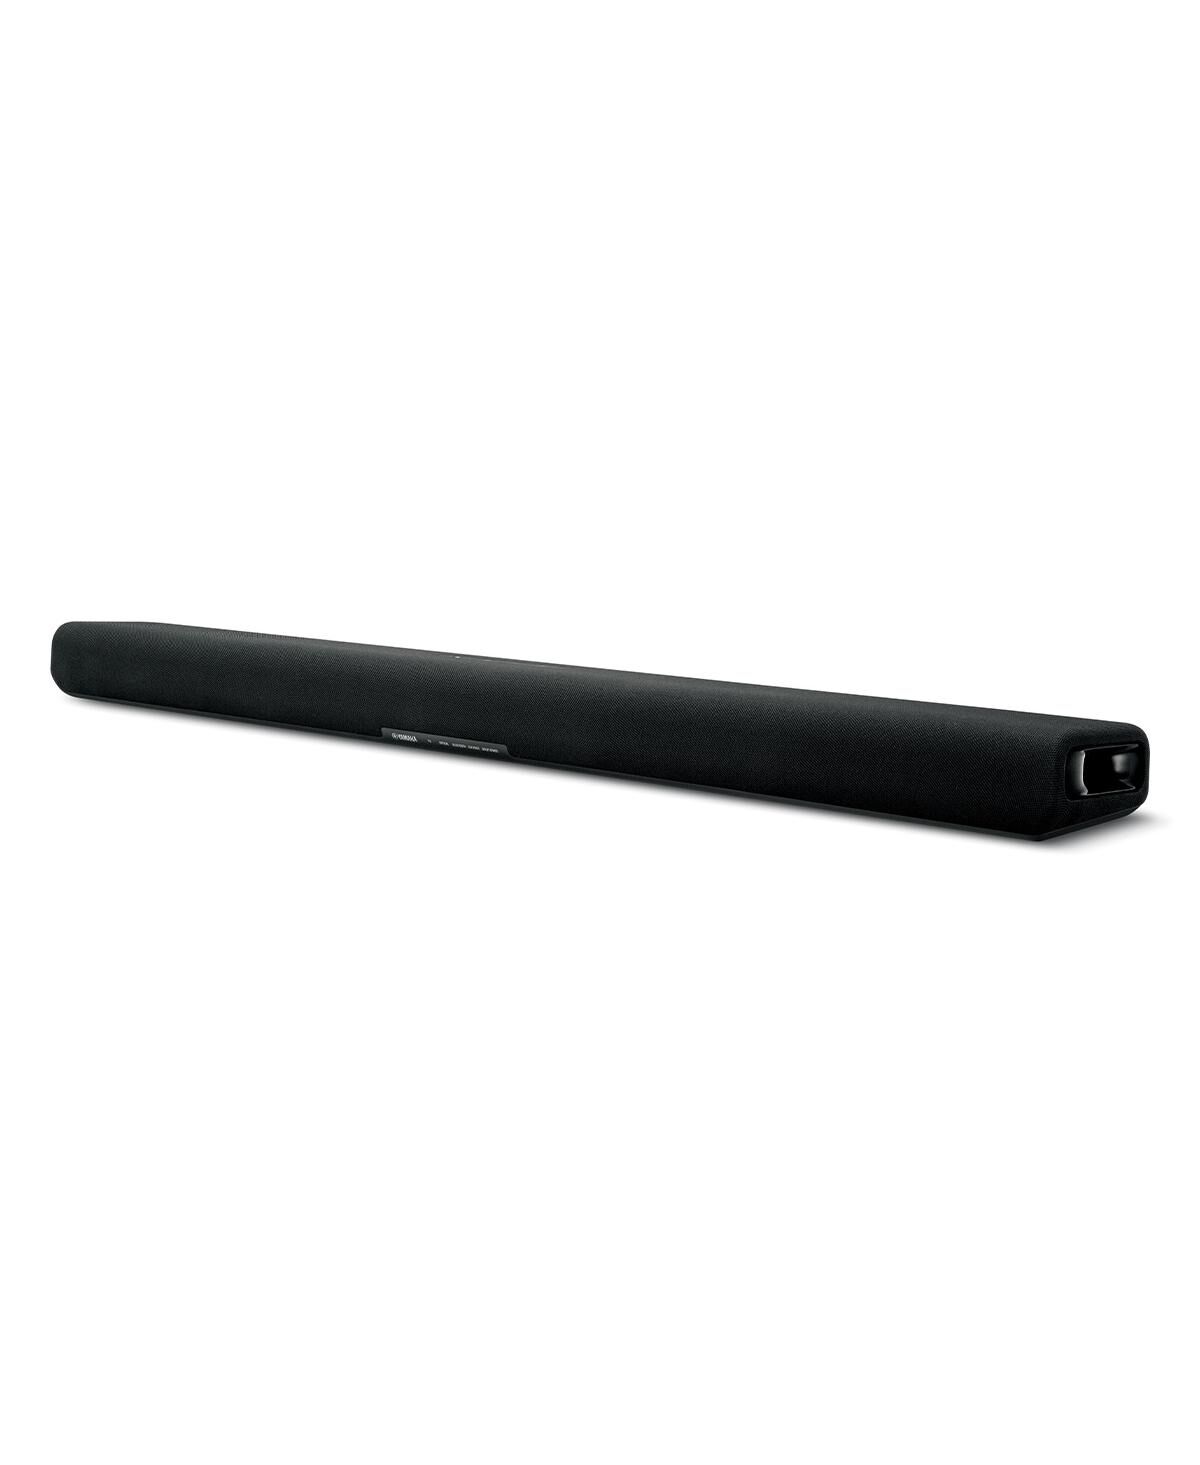 Yamaha Sr-B30A Sound Bar with Dolby Atmos & Built-In Subwoofers - Black